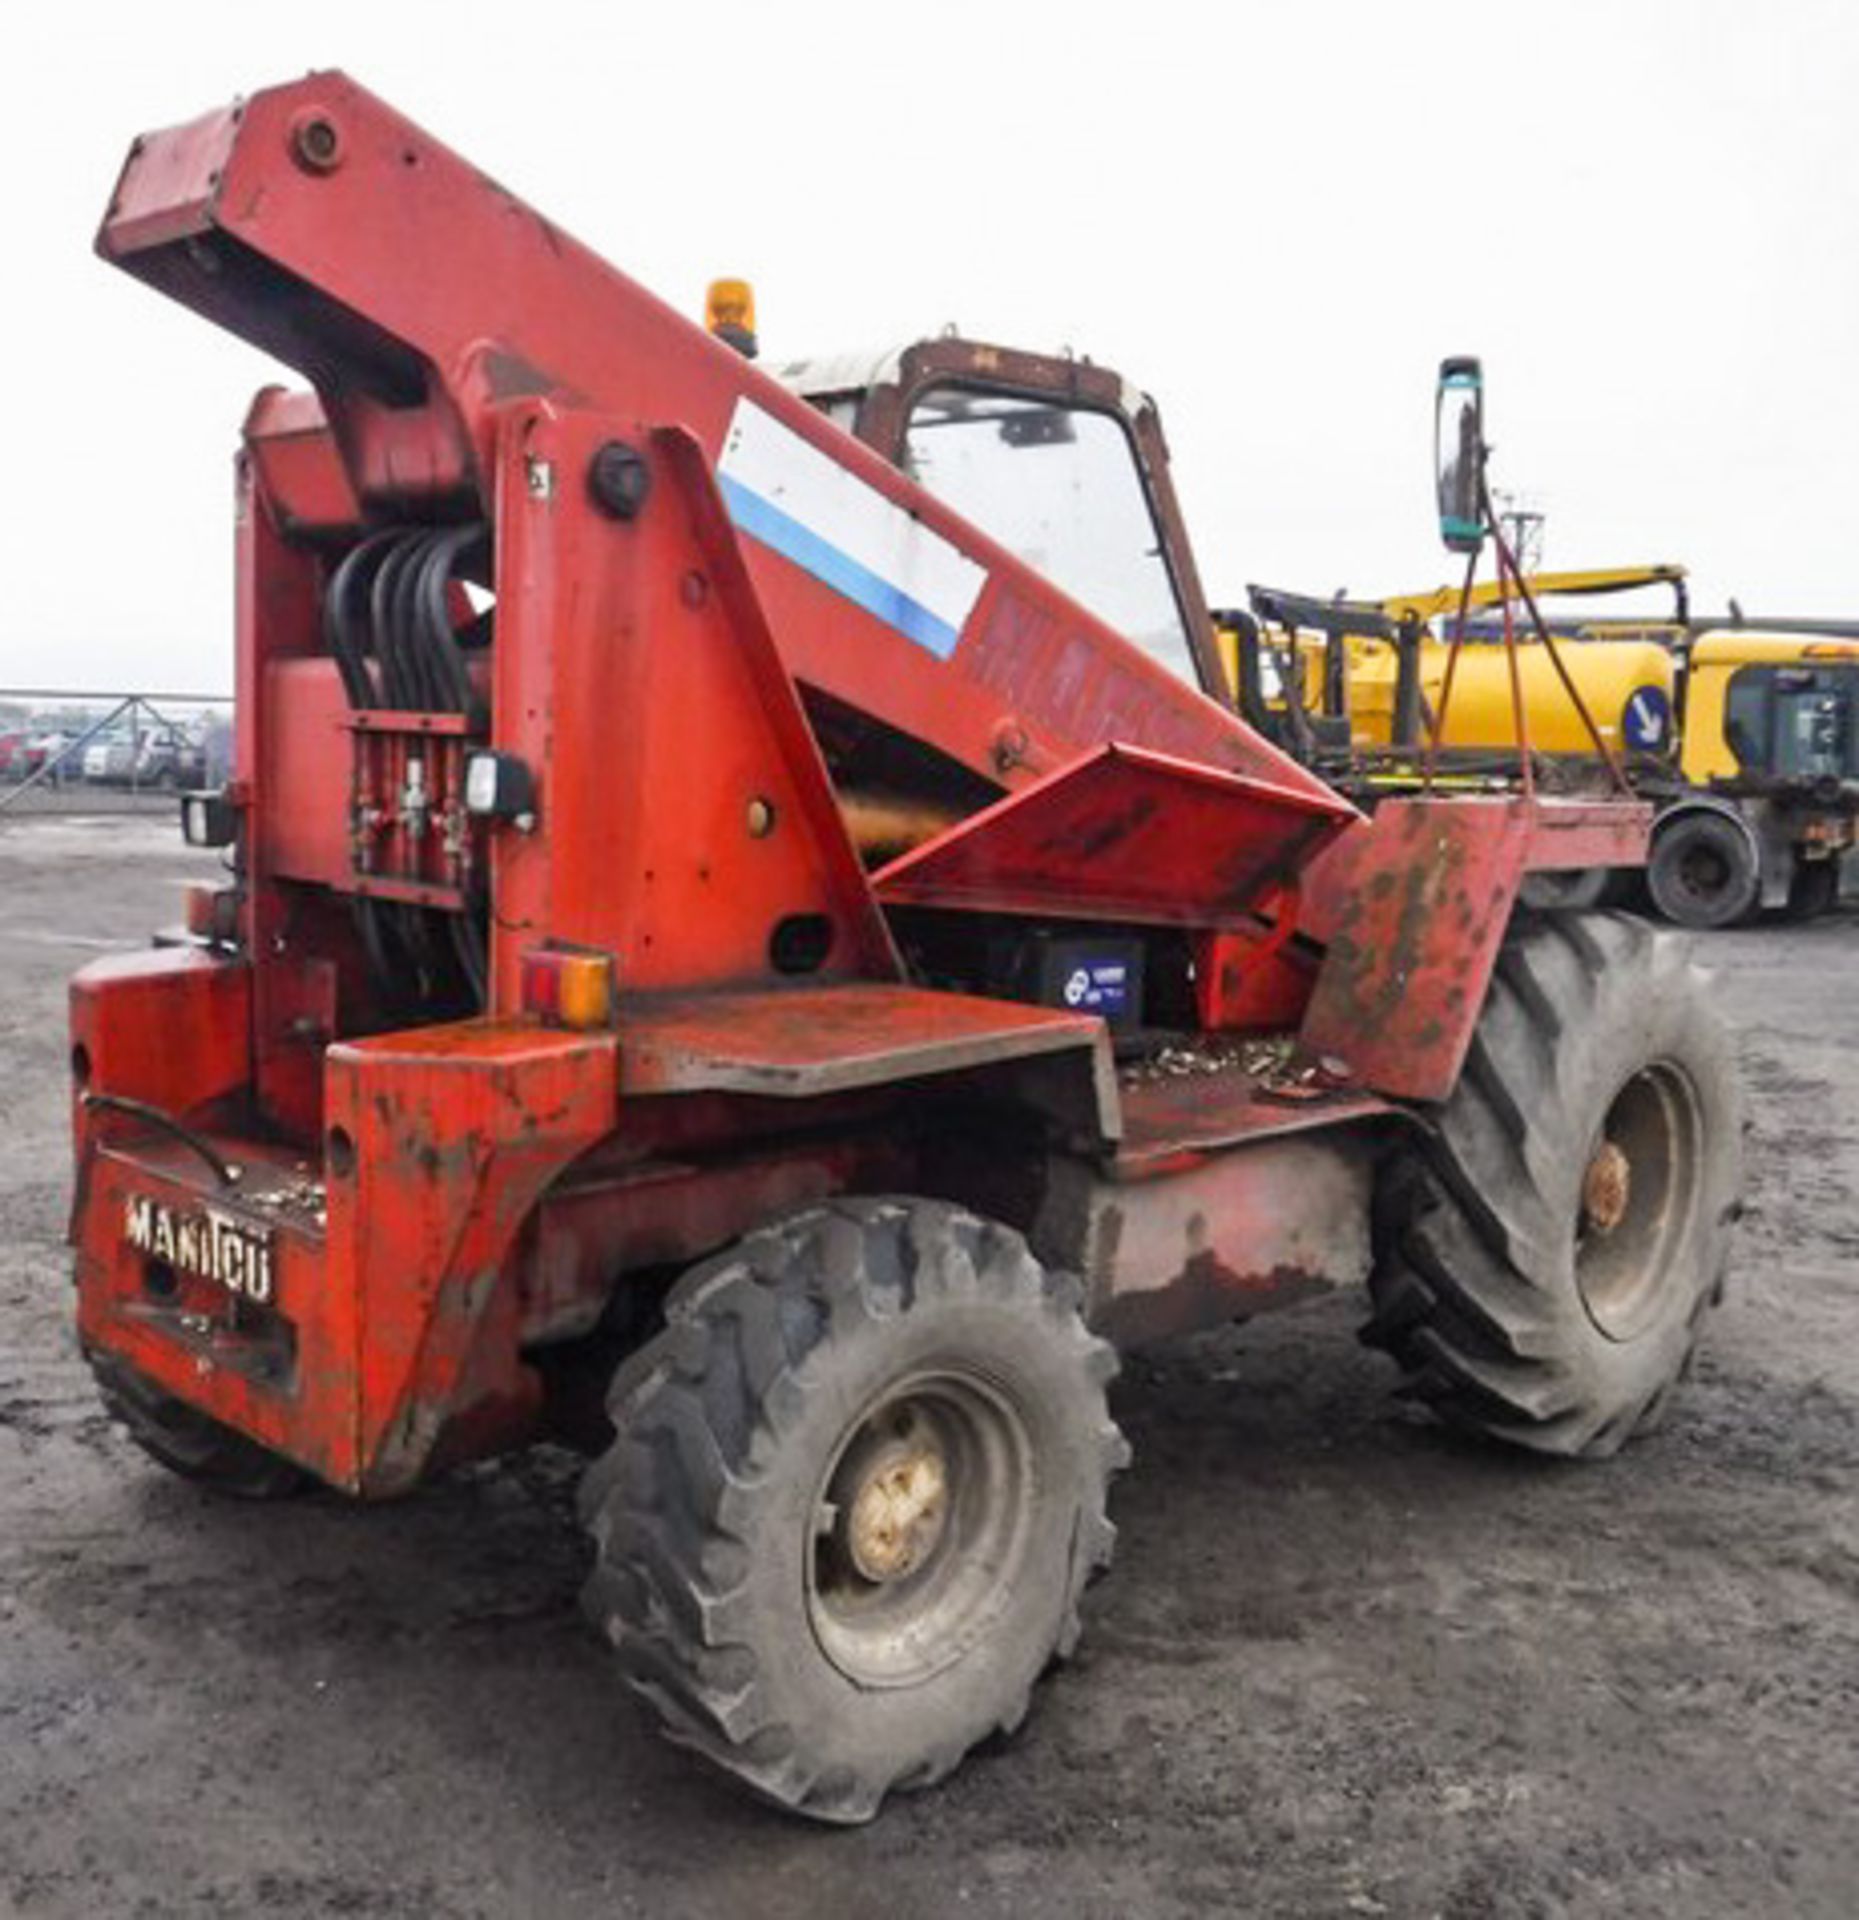 1989 MANITOU TURBO, MODEL - MT425CPT, SERIES 2, CHASSIS 185836, 5693HRS (NOT VERIFIED) ** 10% BUYERS - Image 11 of 15